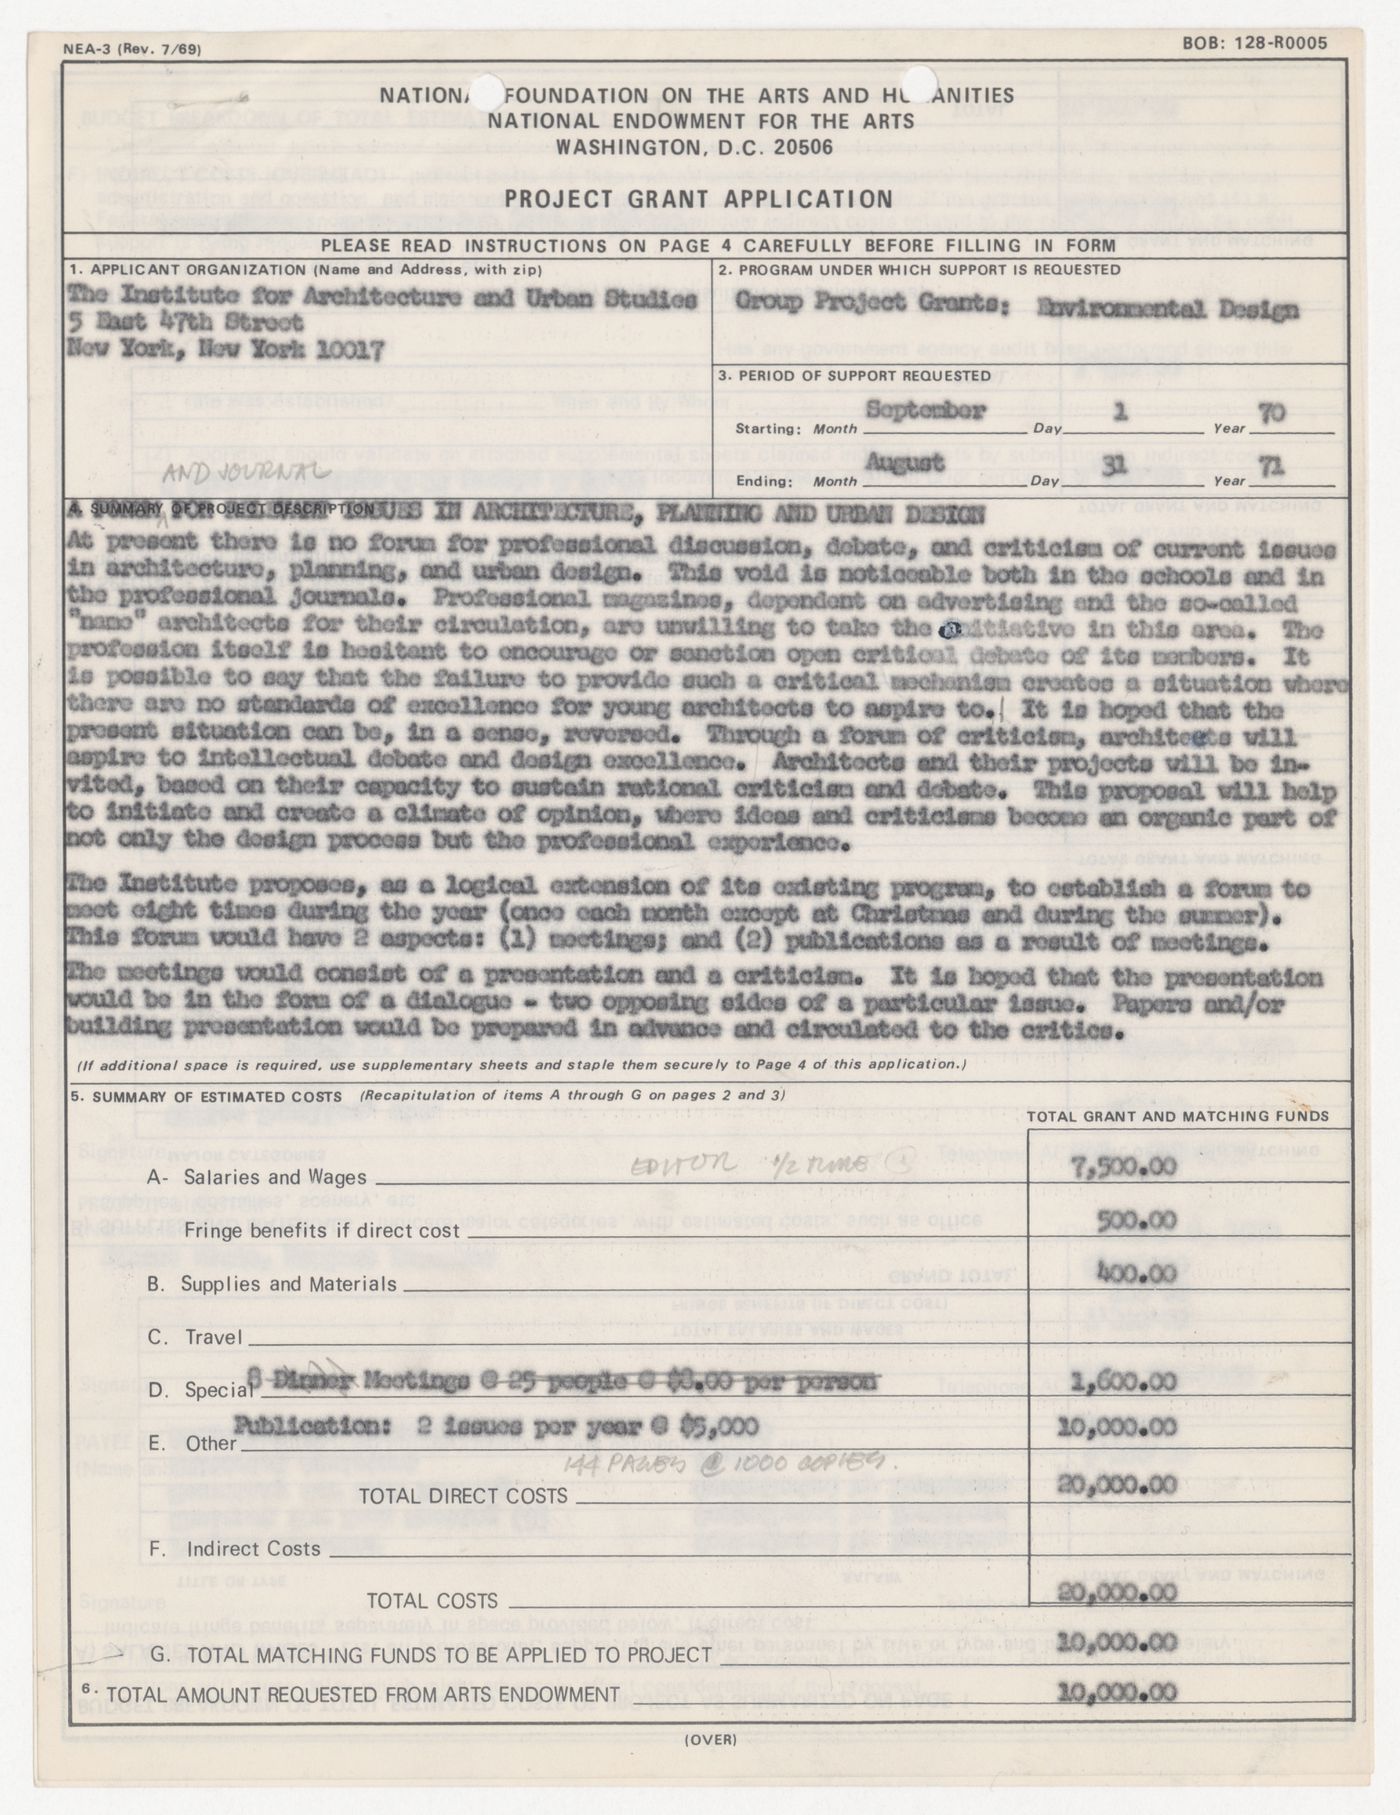 Project grant application for National Endowment for the Arts (NEA) with annotations by Peter D. Eisenman and attached project description